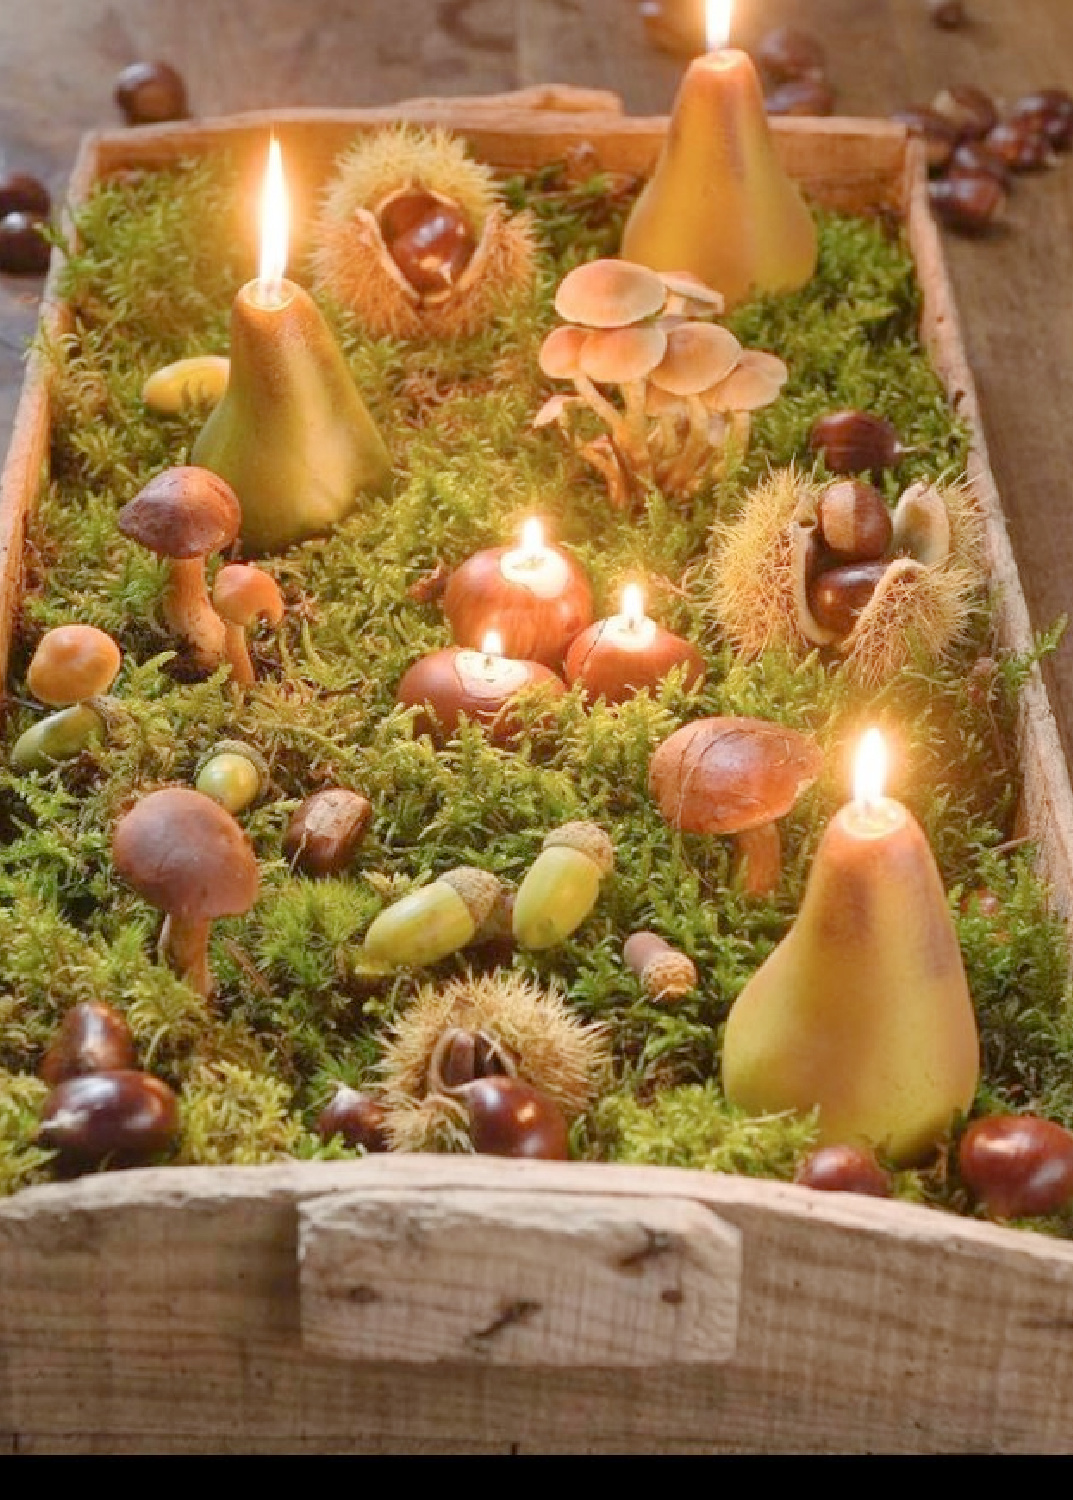 Charming rustic woodland crate filled with moss, pear candles, mushrooms and natural decor - Le Moulin Bregeon. #frenchchristmas #rusticchristmas #frenchcountrydecor